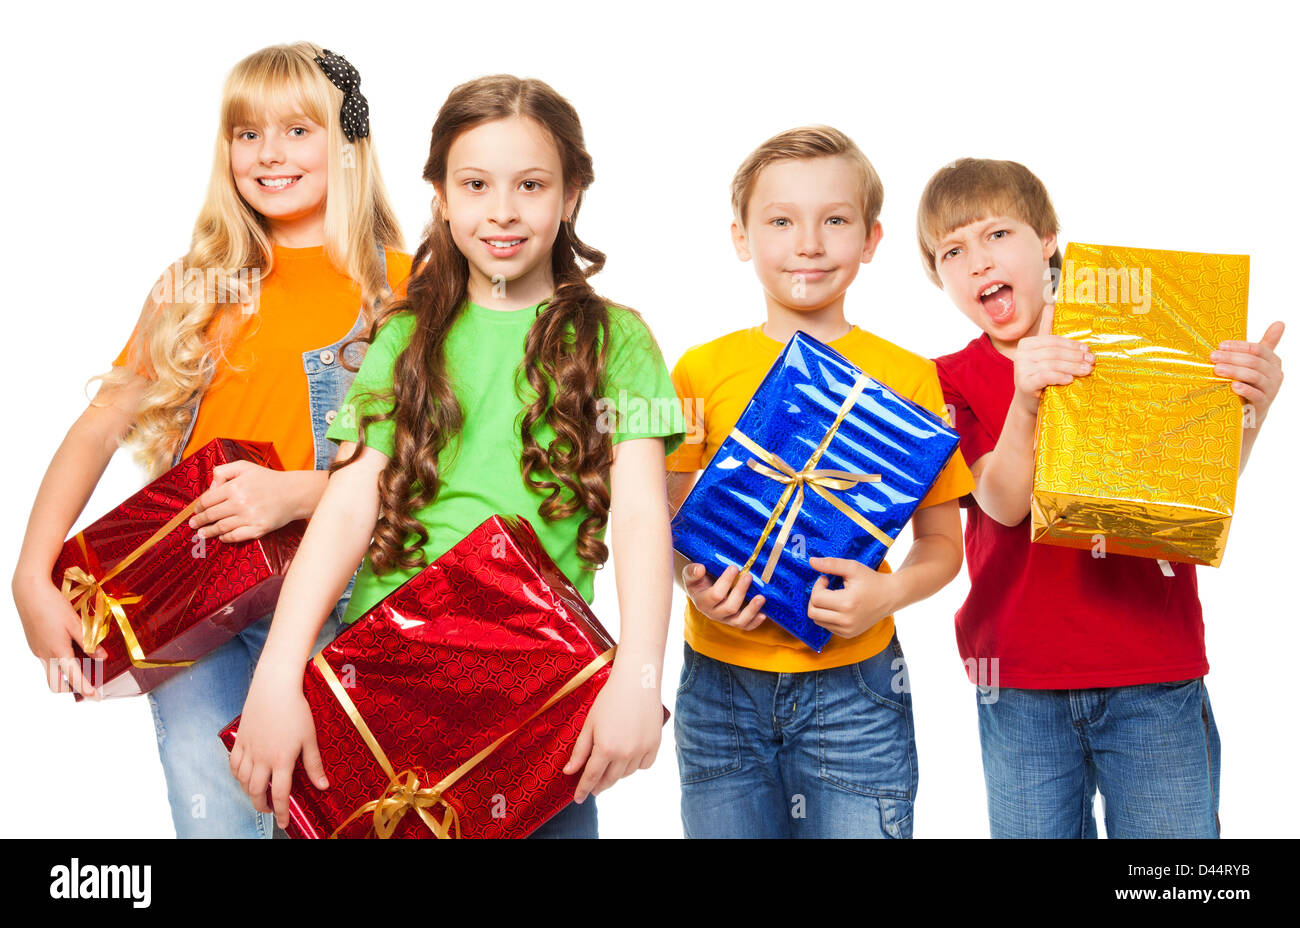 funny 8 years old kids holding presents isolated on white Stock Photo